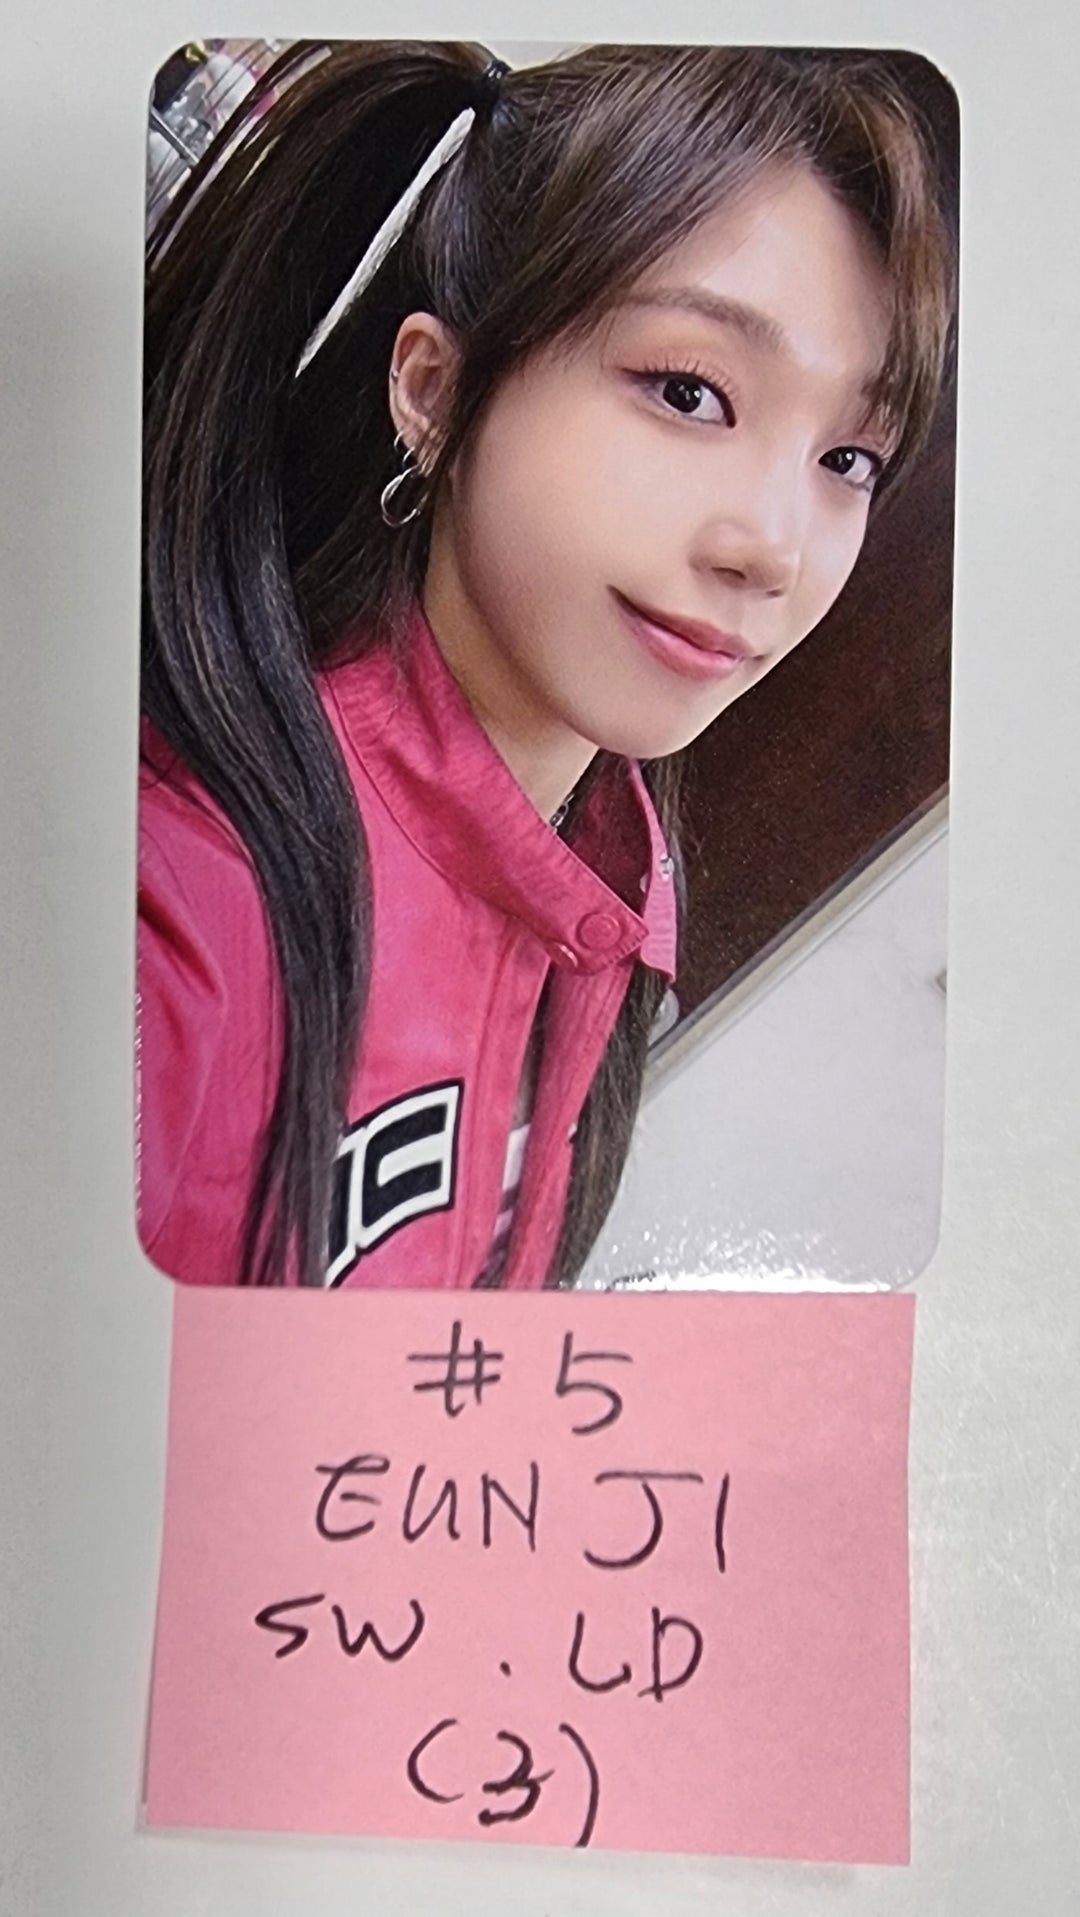 Apink "SELF" 10th Mini Album - Soundwave Lucky Draw Event Photocard [Updated 4/21]